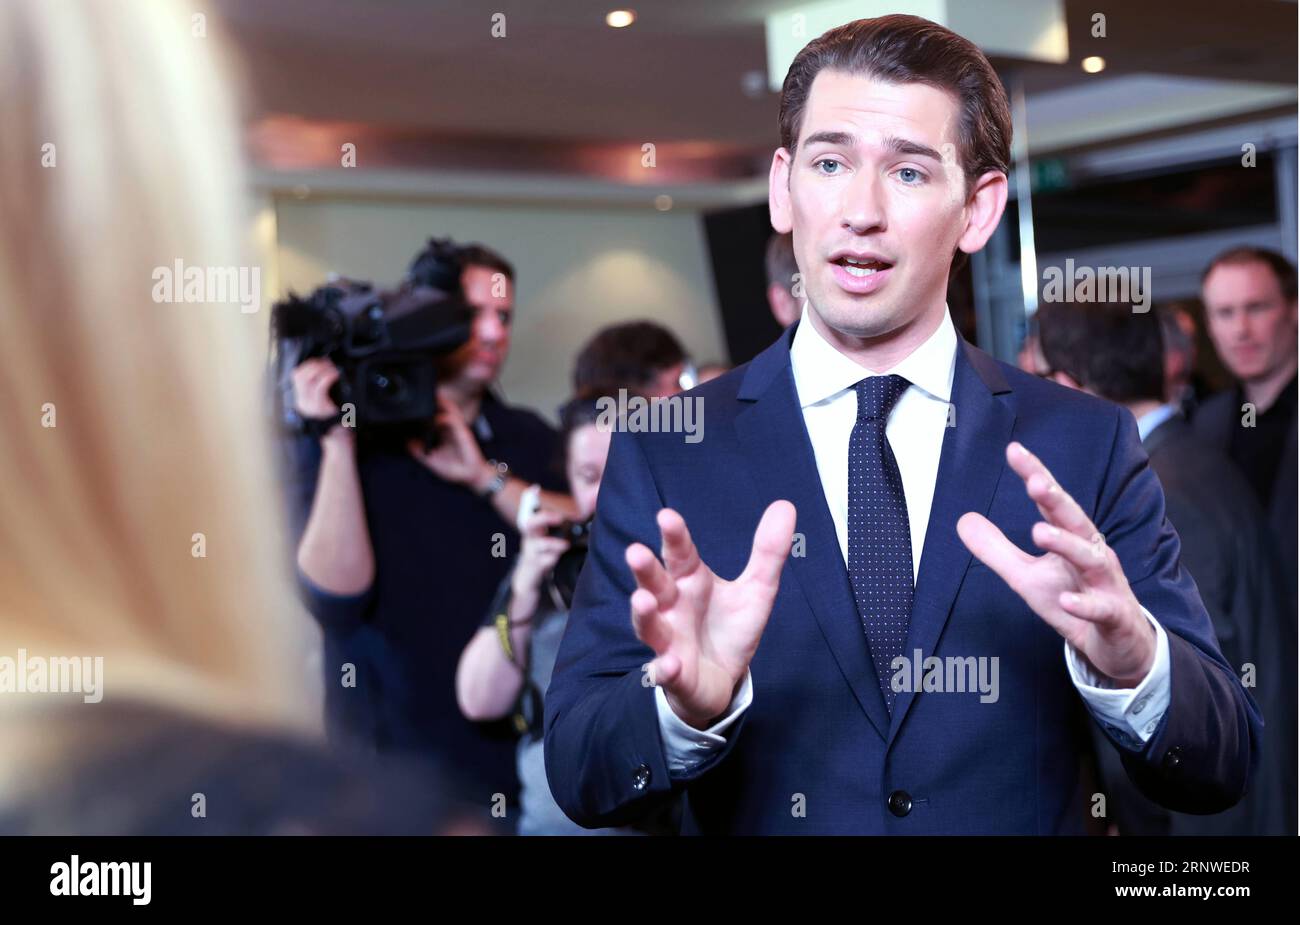 (171217) -- VIENNA, Dec. 17, 2017 -- Sebastian Kurz, leader of the People s Party, speaks to reporters after a press conference in Vienna, capital of Austria, Dec. 16, 2017. The People s Party and the Freedom Party will form a coalition government for the coming five years. Sebastian Kurz will be the chancellor and Heinz-Christian Strache, leader of the Freedom Party, will be the vice chancellor. ) (gj) AUSTRIA-VIENNA-COALITION GOVERNMENT PanxXu PUBLICATIONxNOTxINxCHN Stock Photo